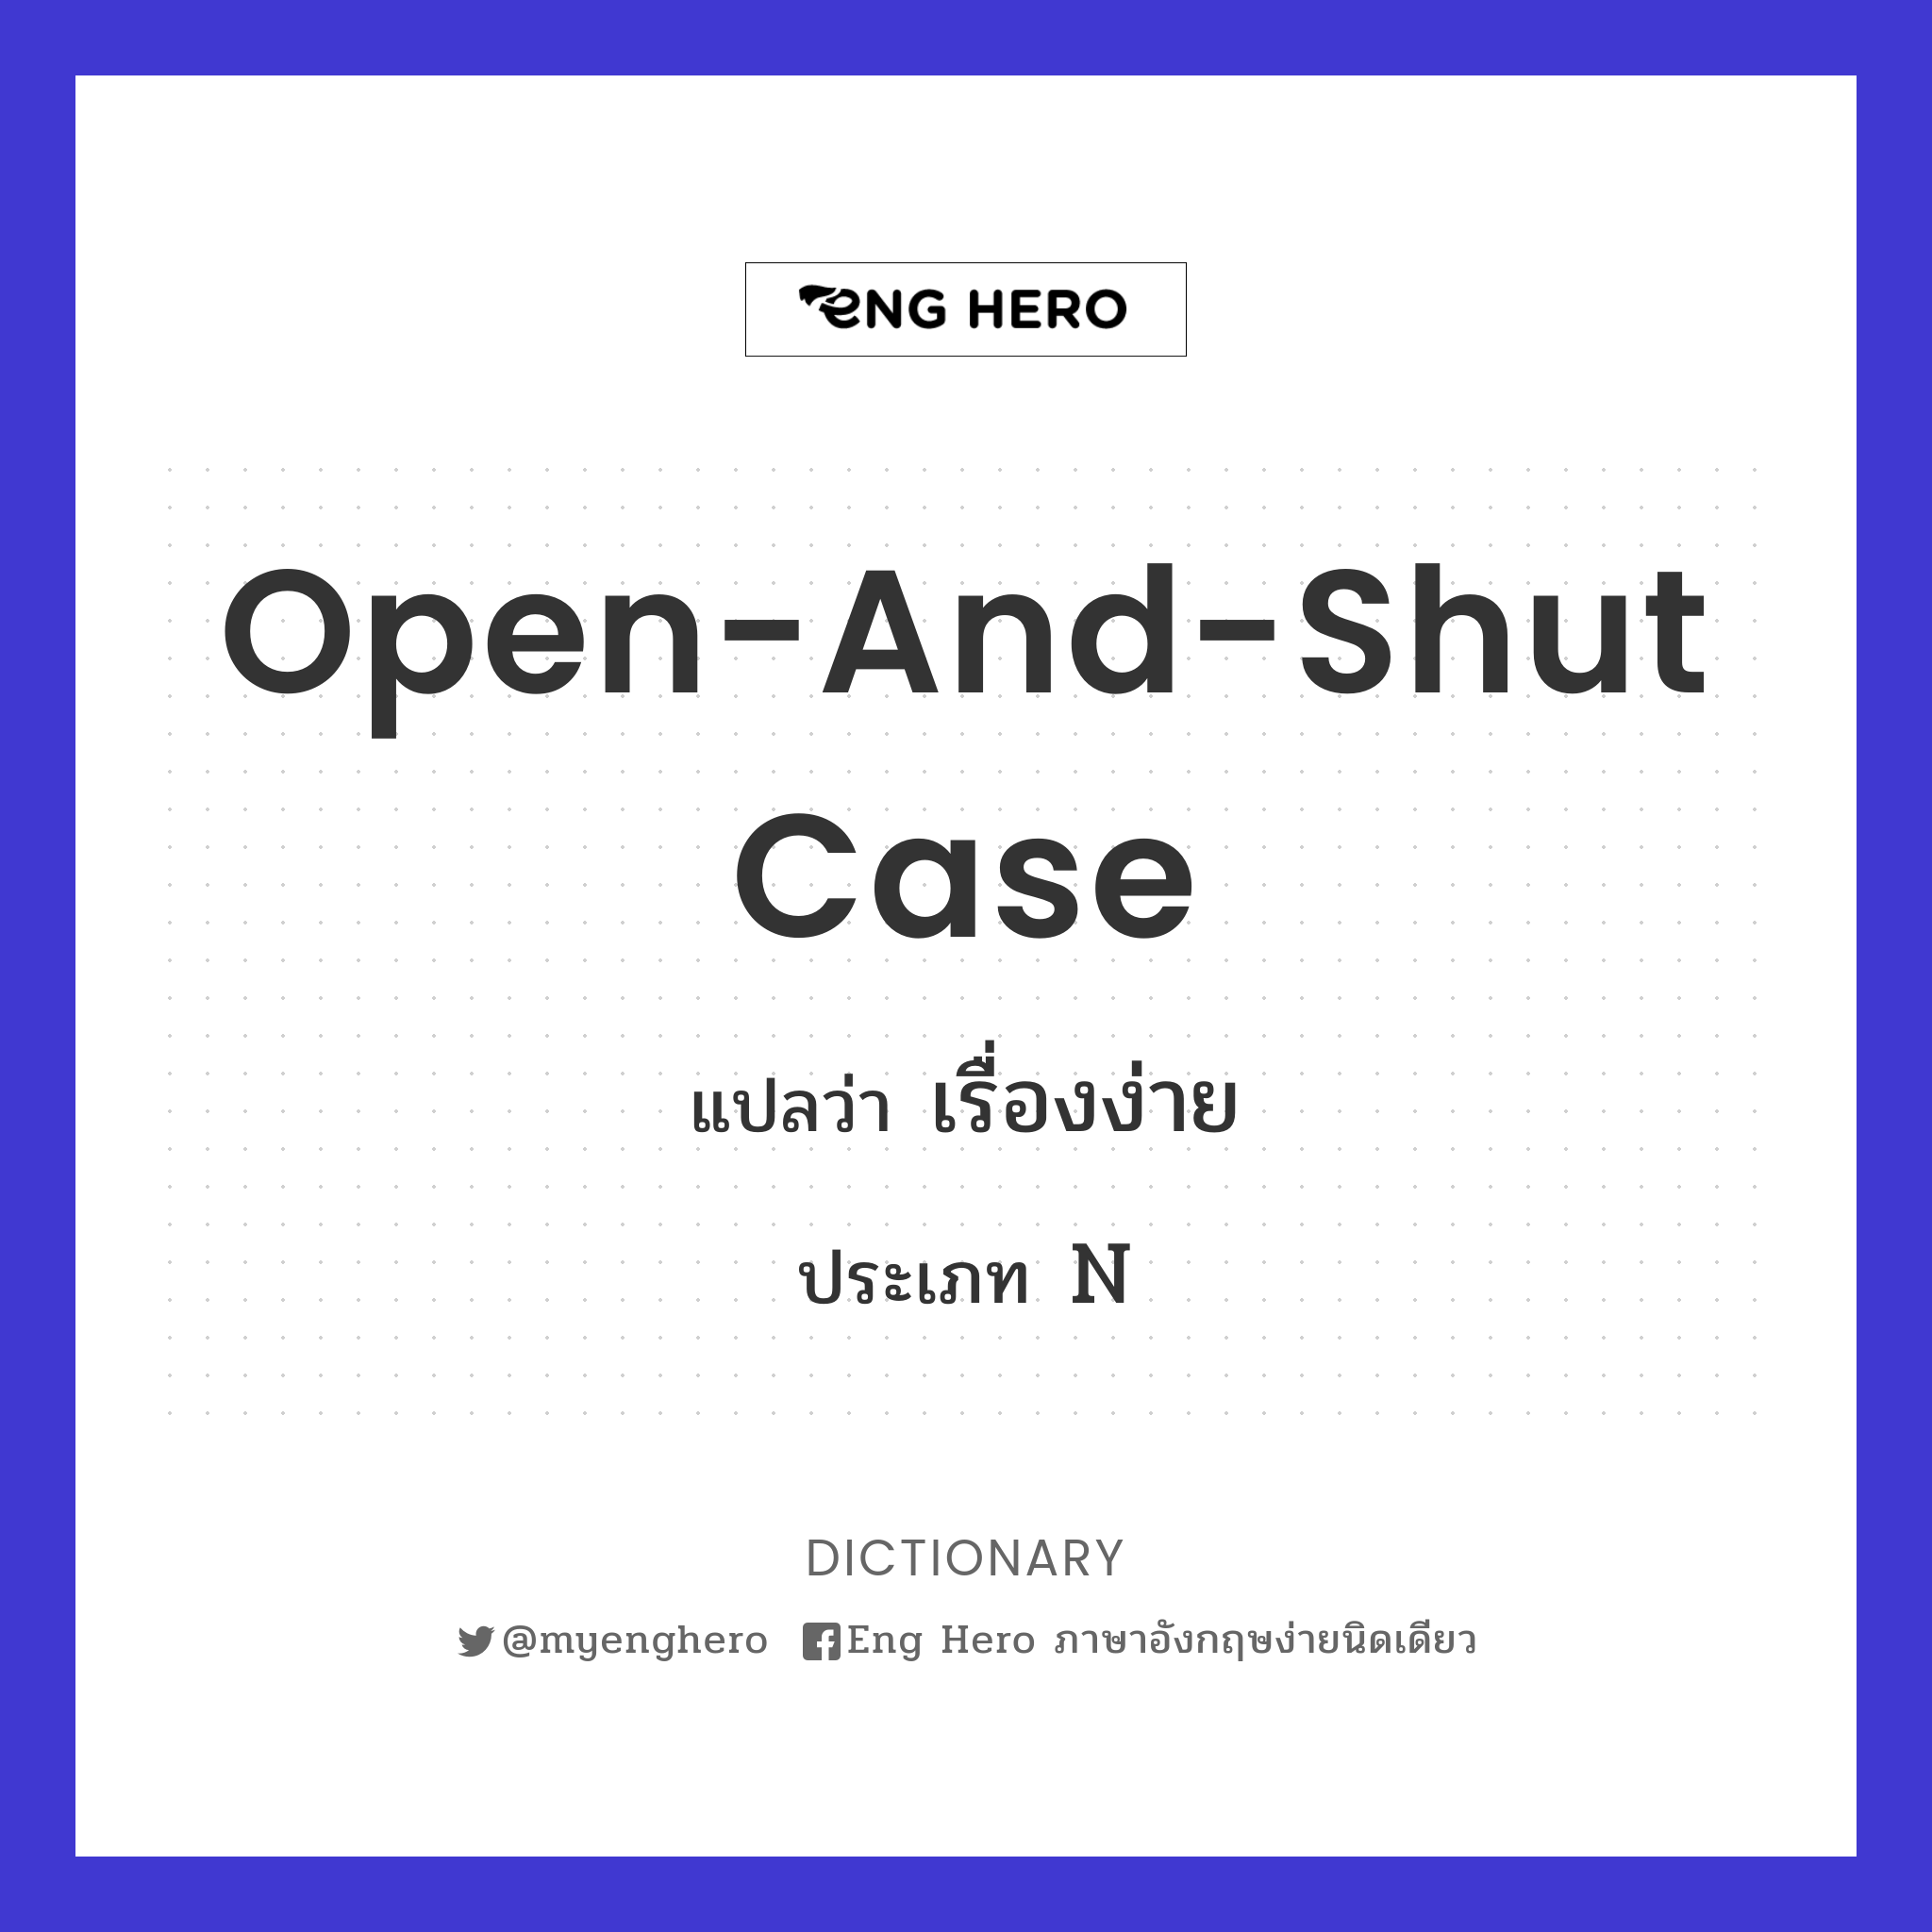 open-and-shut case